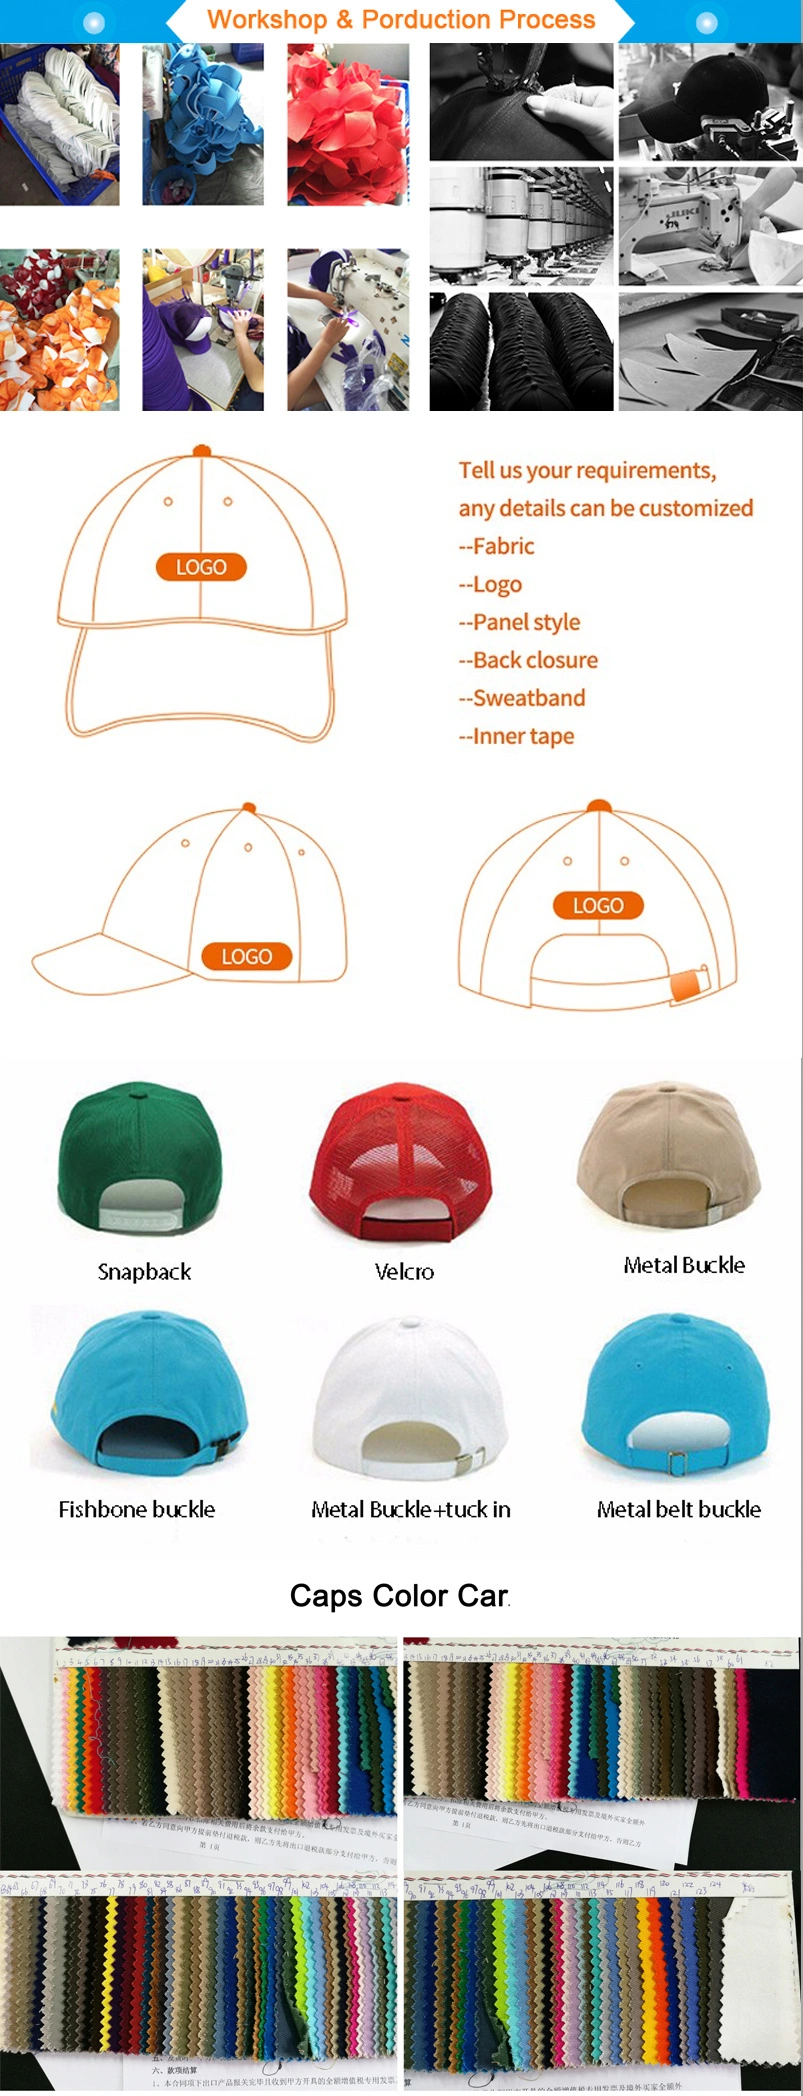 High Quality 100% Cotton Structured Unstructured 6 Panel Custom Embroidery Logo Men Caps Flat Brim Hats Snapback Caps